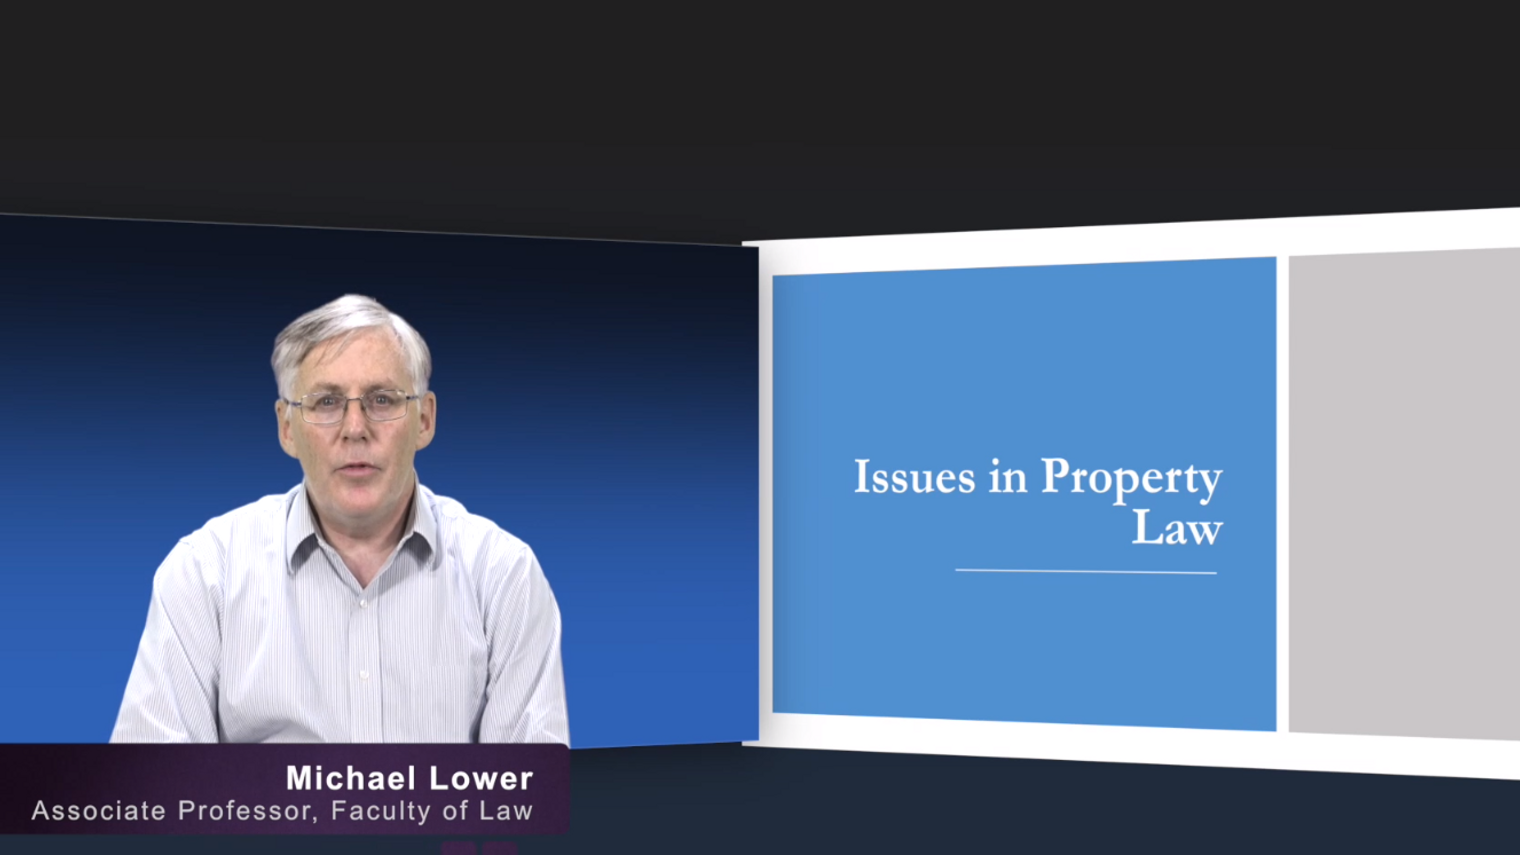 Introduction to Issues in Property Law